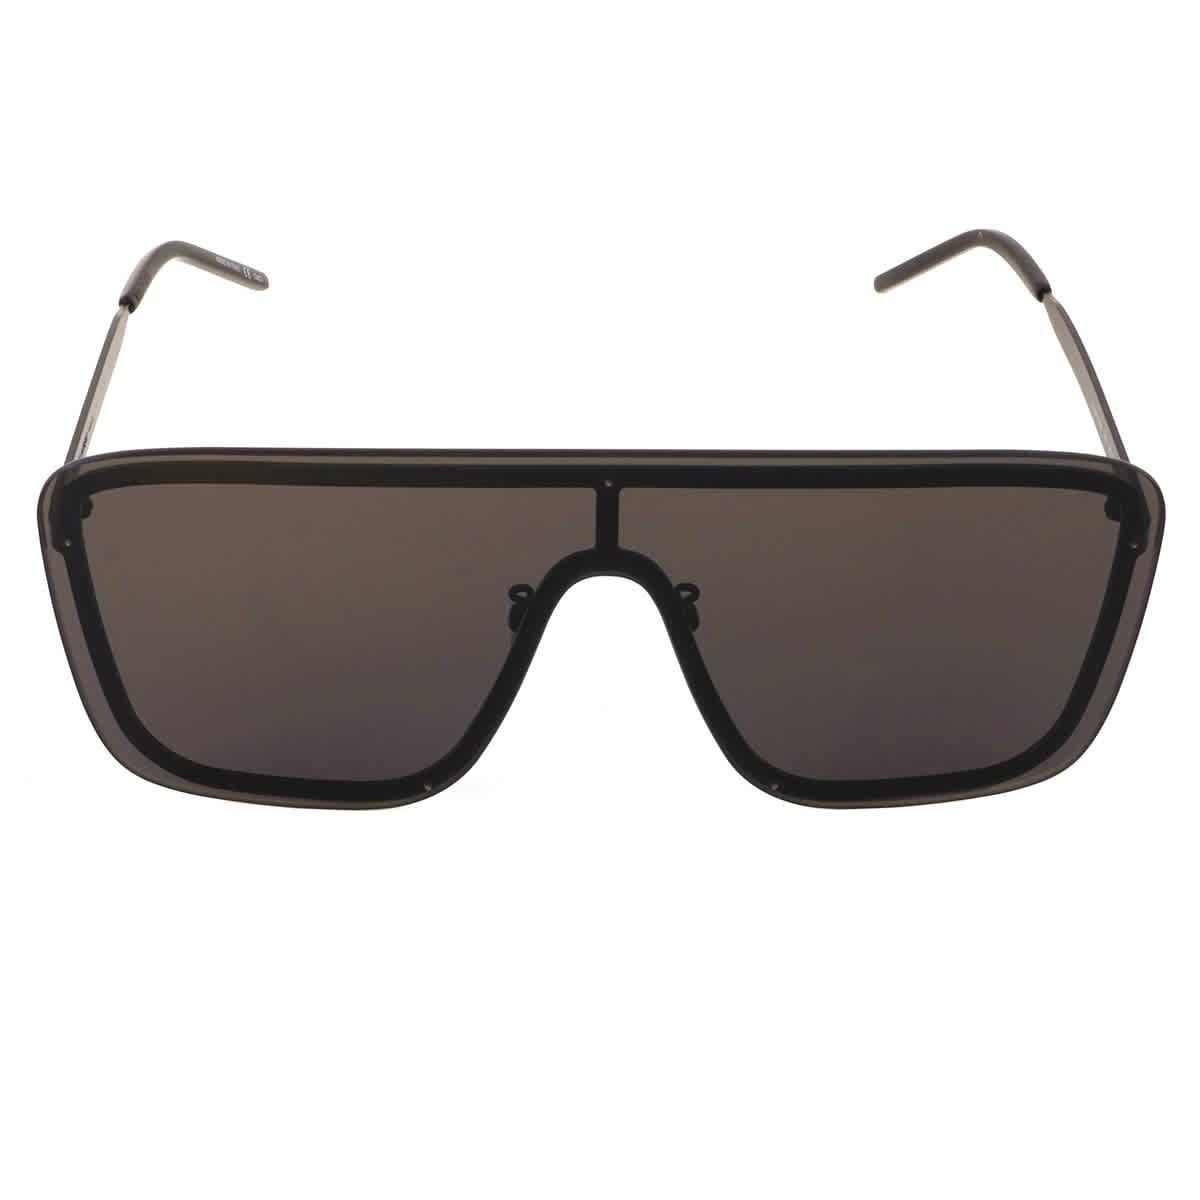 Womens The Mask 99MM Metal Sunglasses Product Image